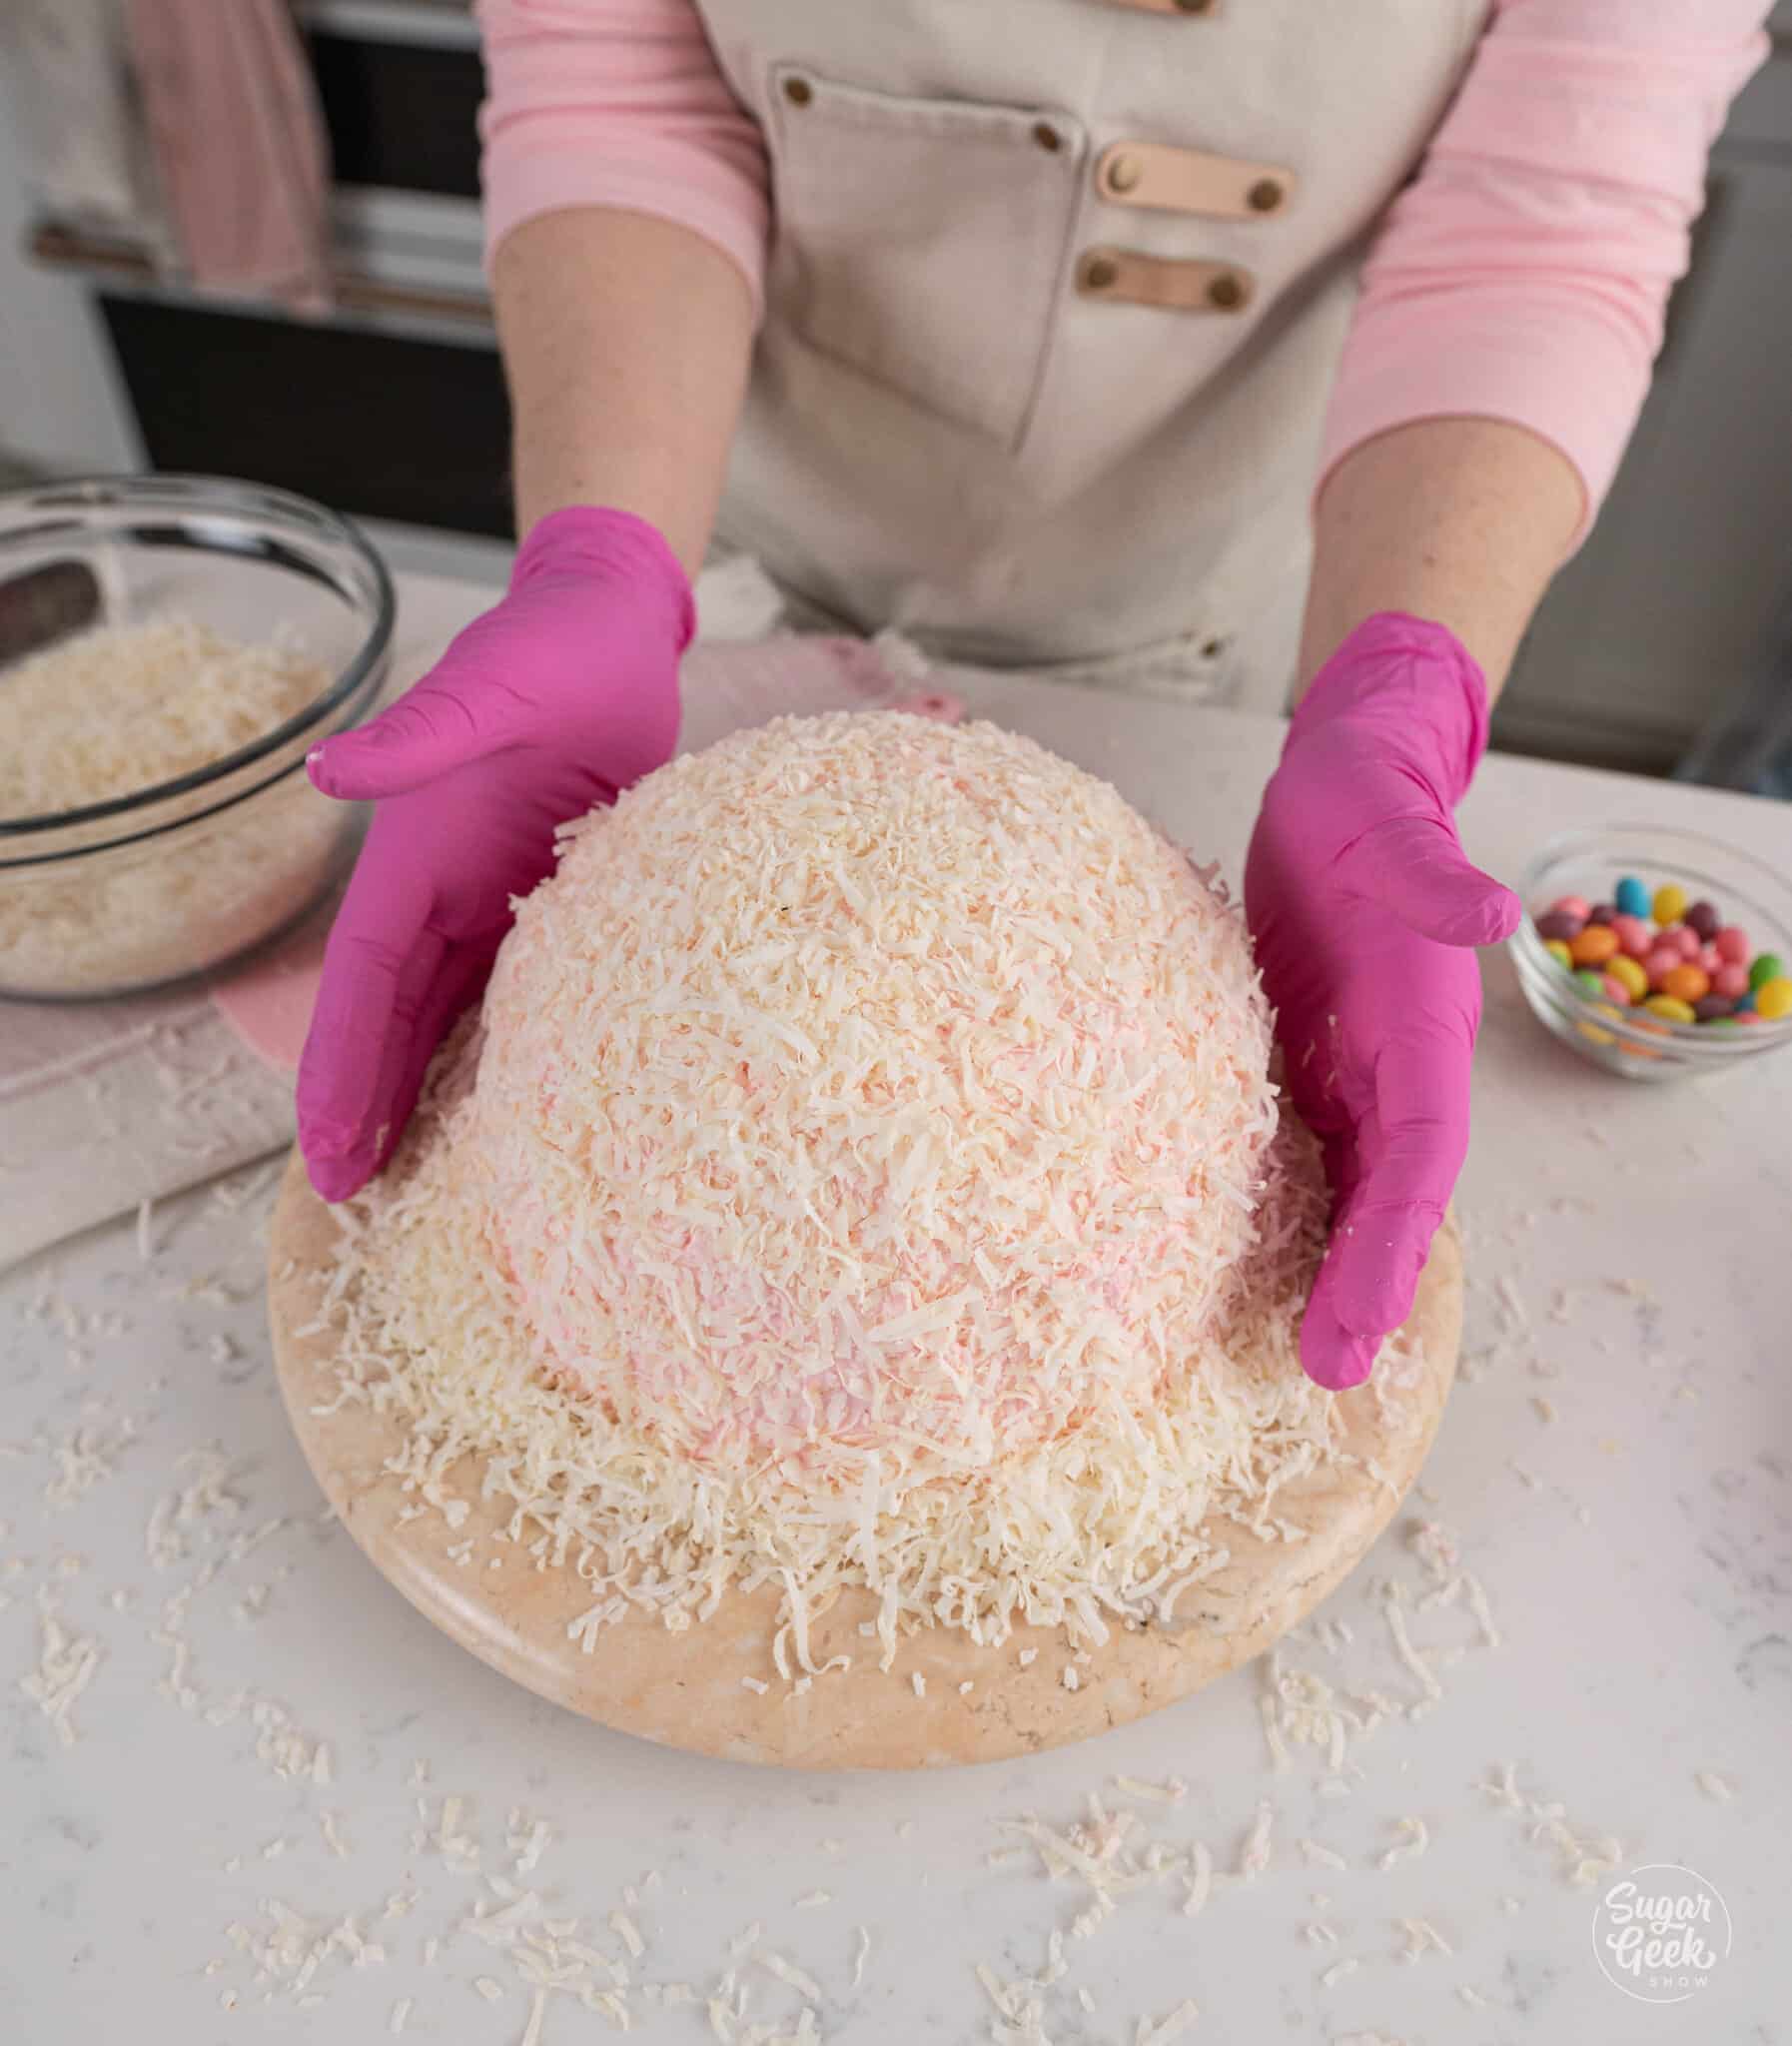 covering a dome cake in coconut